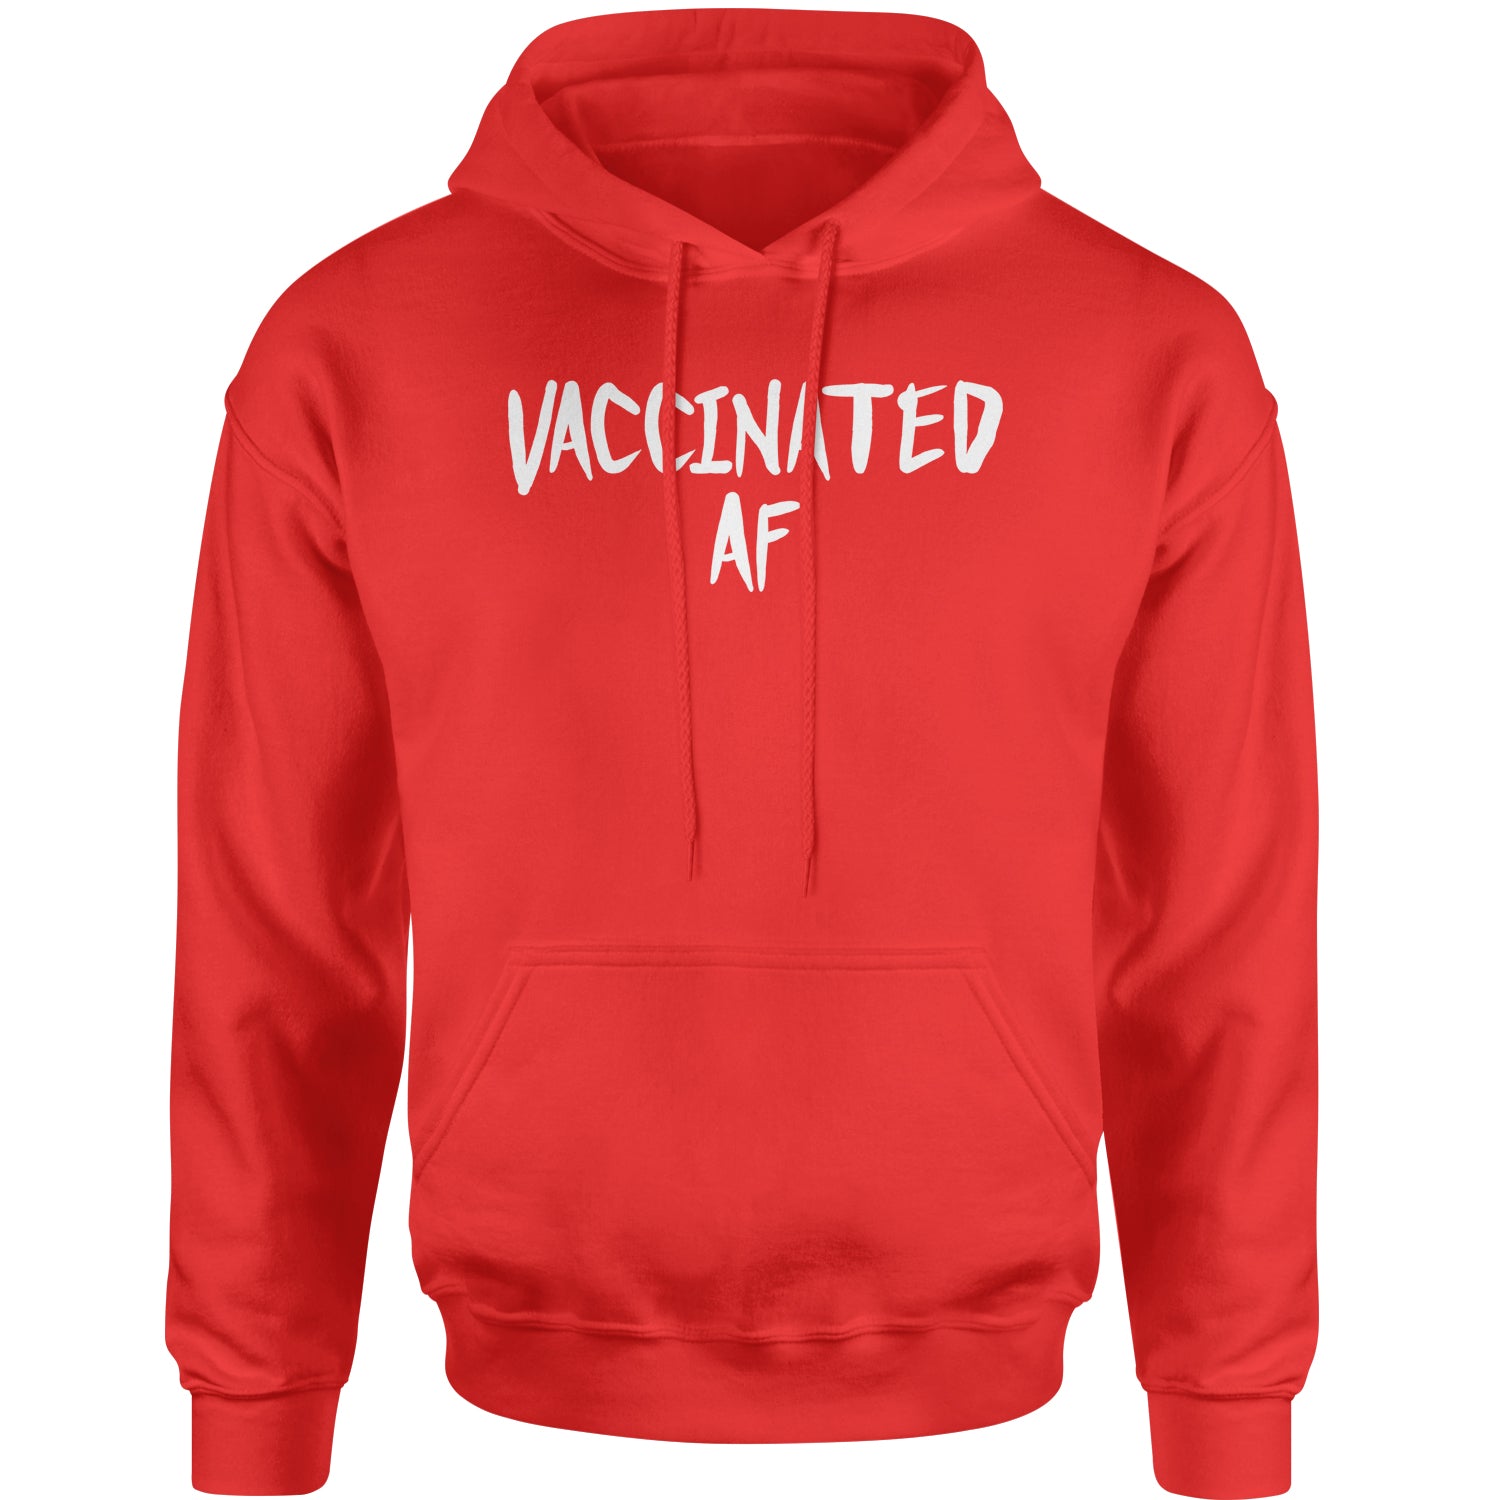 Vaccinated AF Pro Vaccine Funny Vaccination Health Adult Hoodie Sweatshirt moderna, pfizer, vaccine, vax, vaxx by Expression Tees